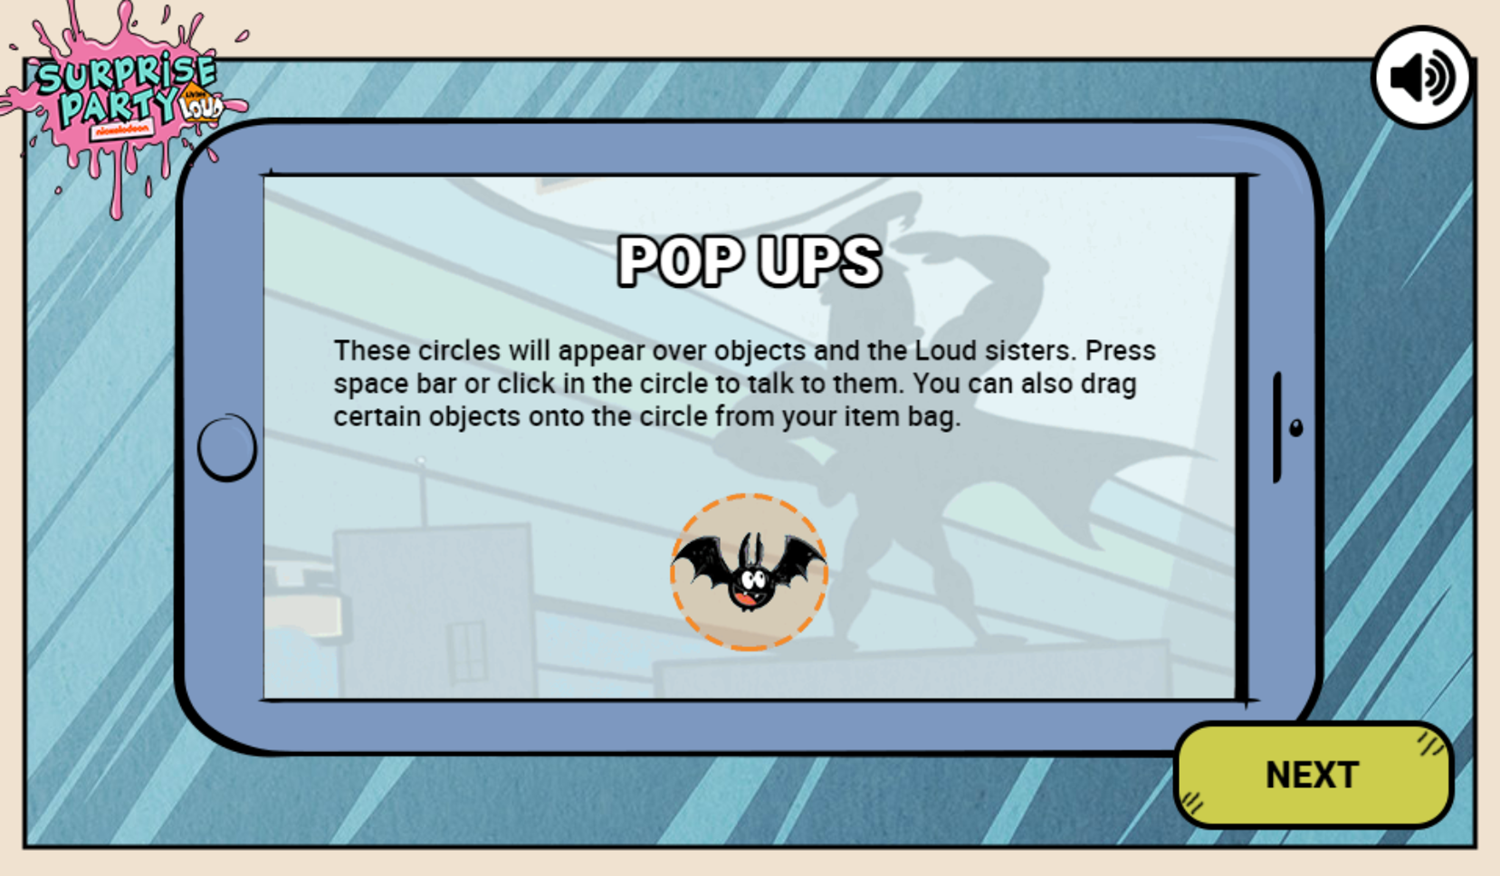 Loud House Surprise Party Game Instructions Screenshot.